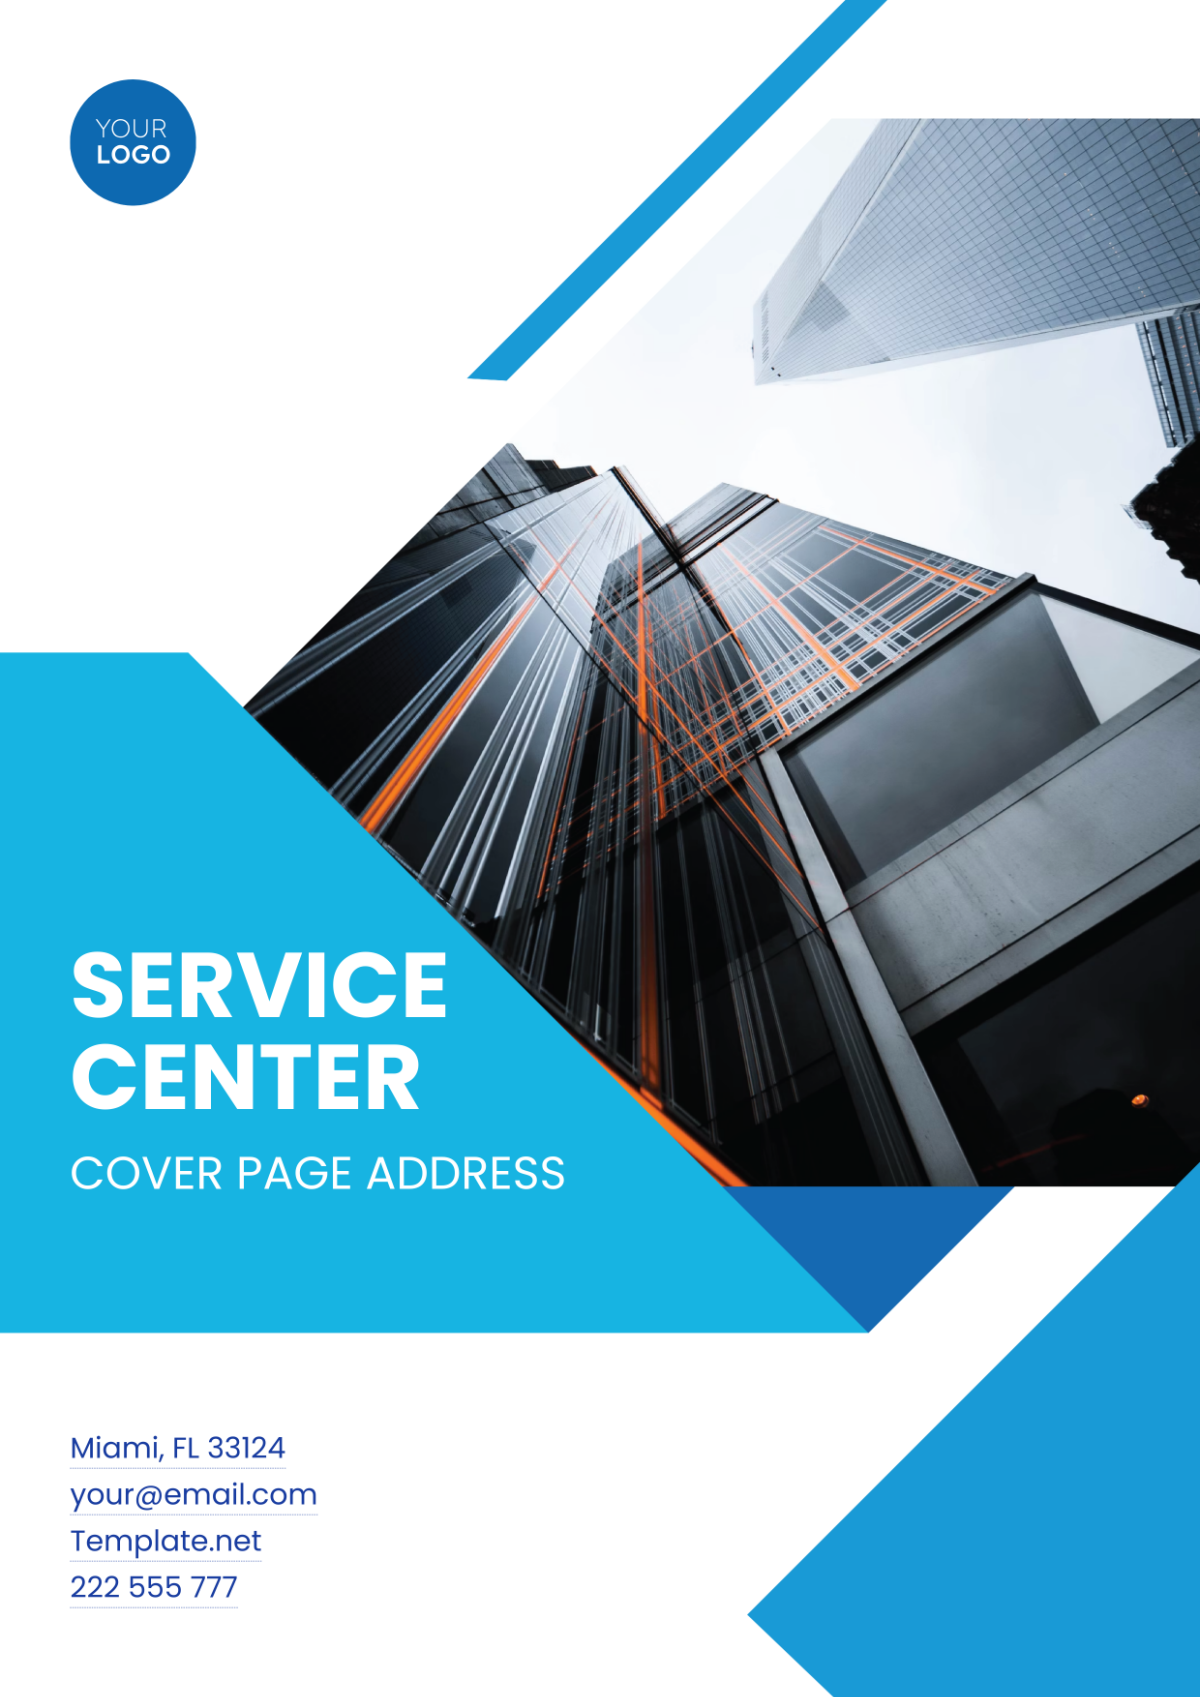 Service Center Cover Page Address Template